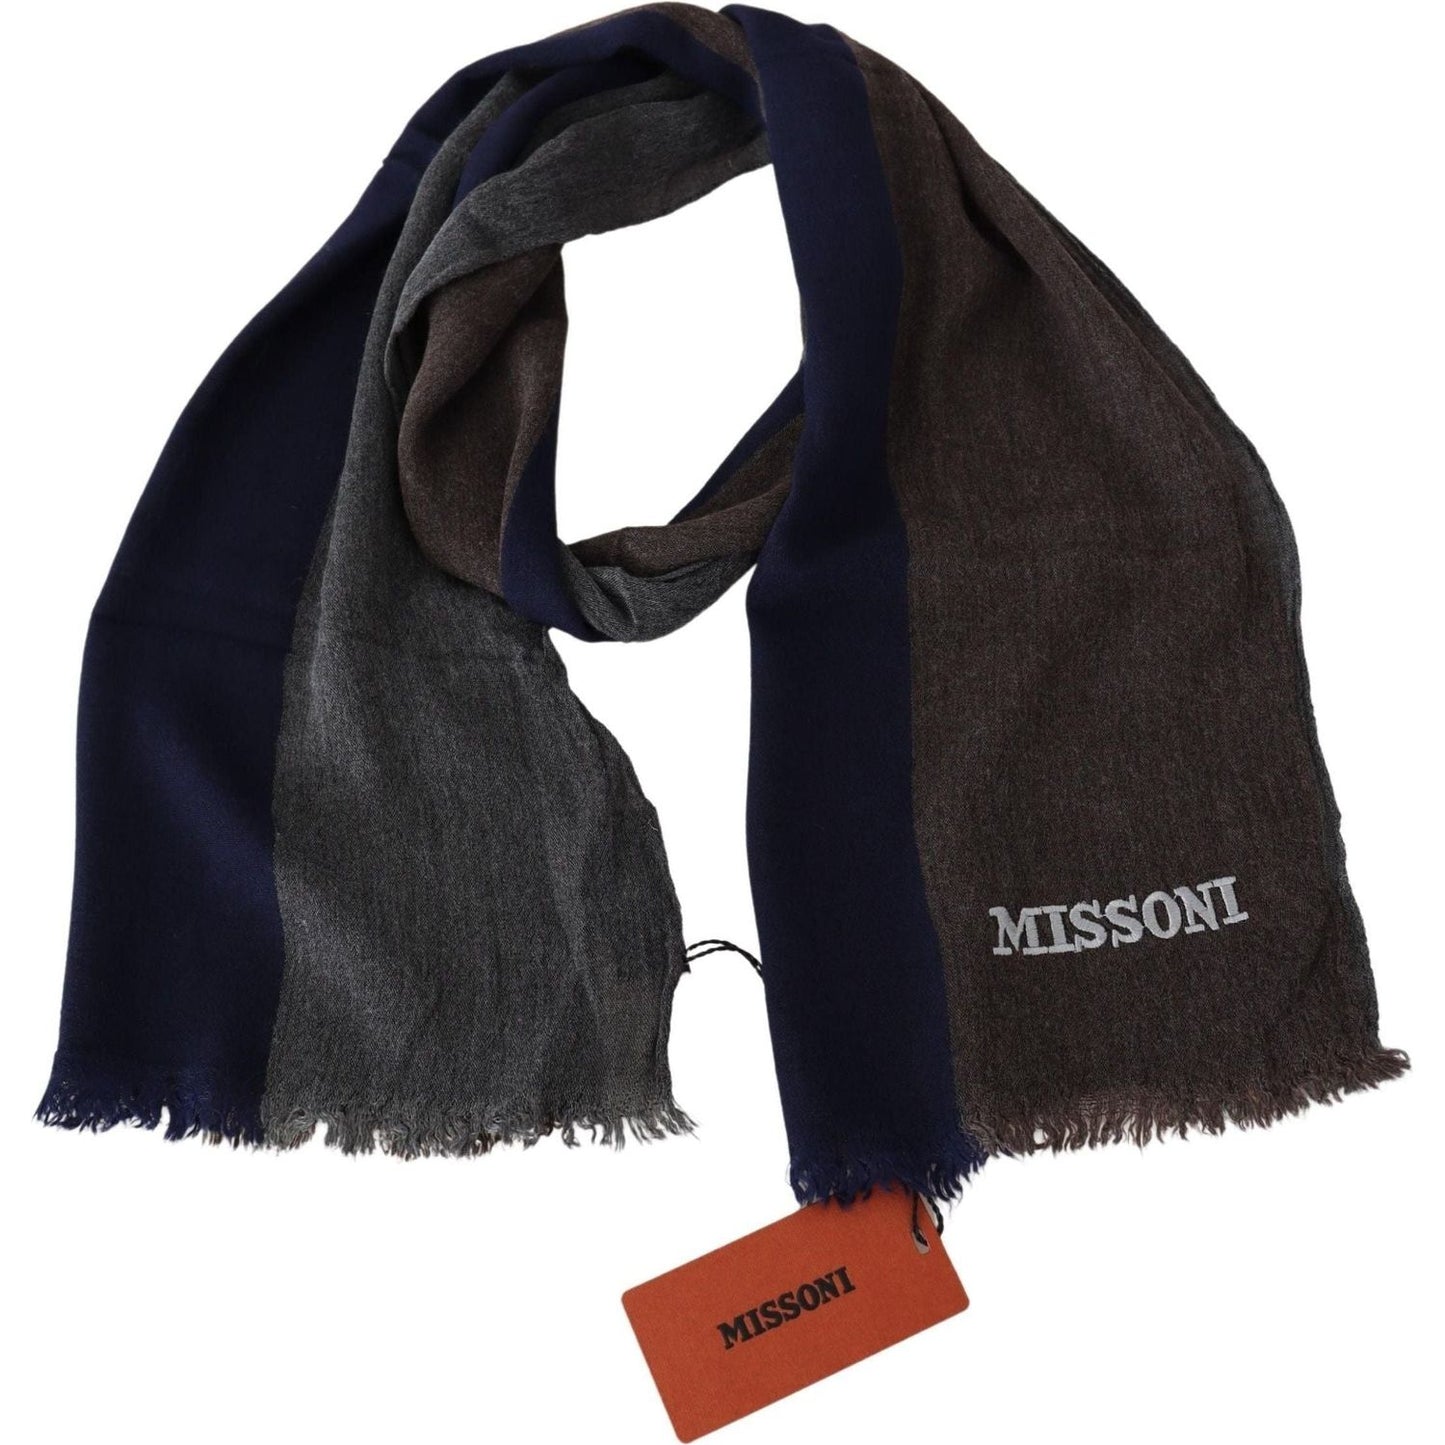 Missoni Elegant Multicolor Wool Scarf with Signature Embroidery multicolor-striped-wool-unisex-wrap-fringes-scarf